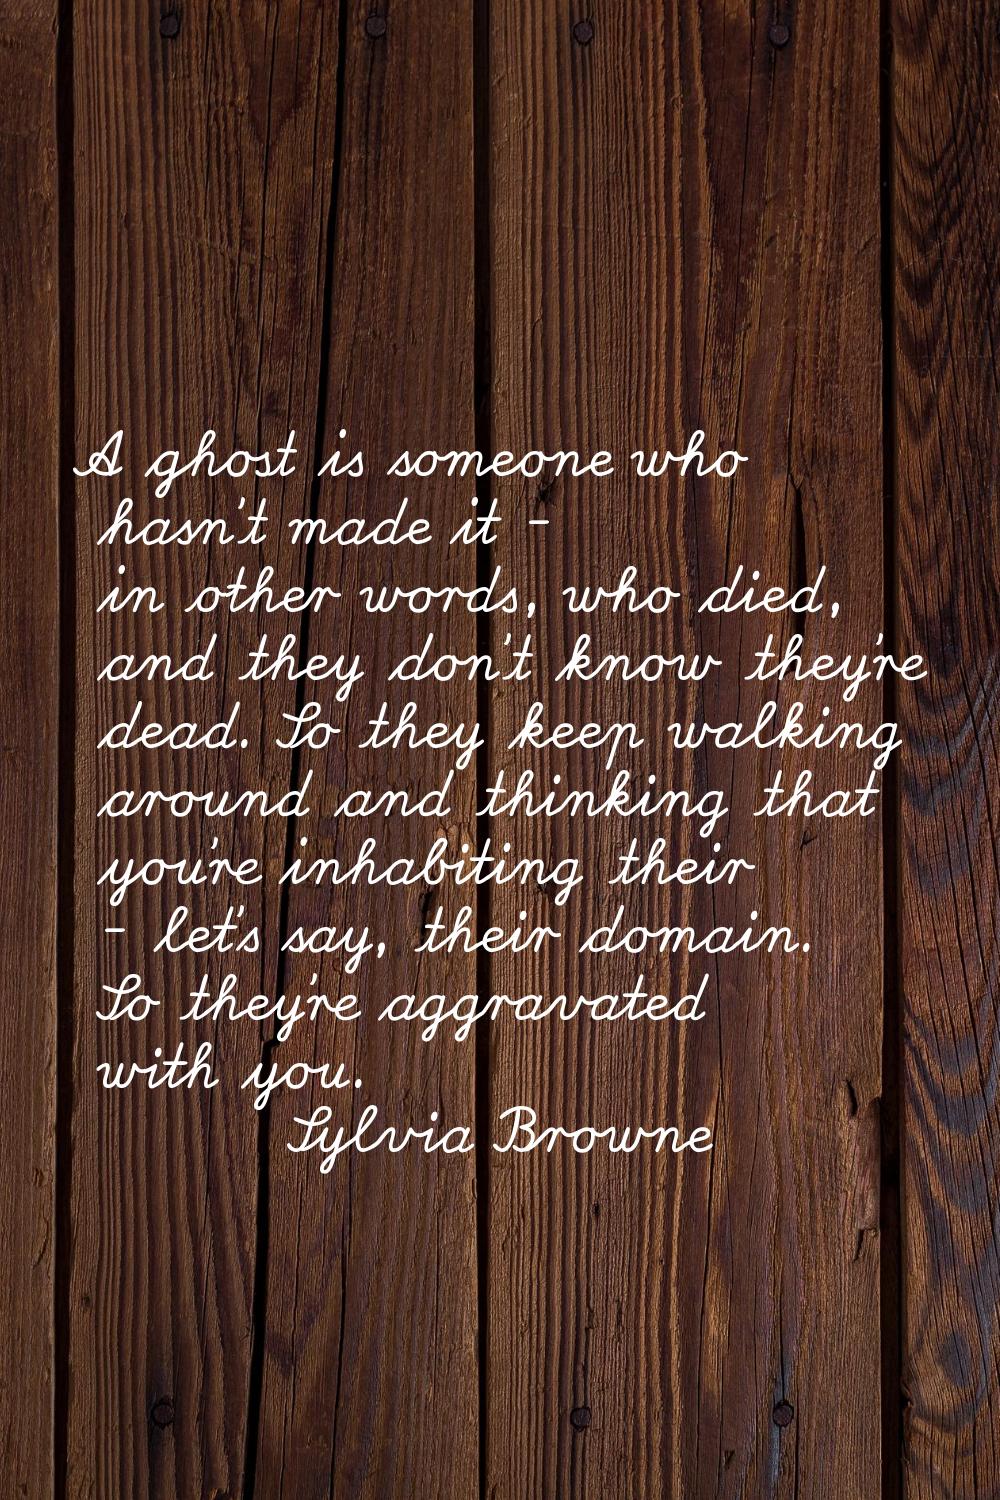 A ghost is someone who hasn't made it - in other words, who died, and they don't know they're dead.